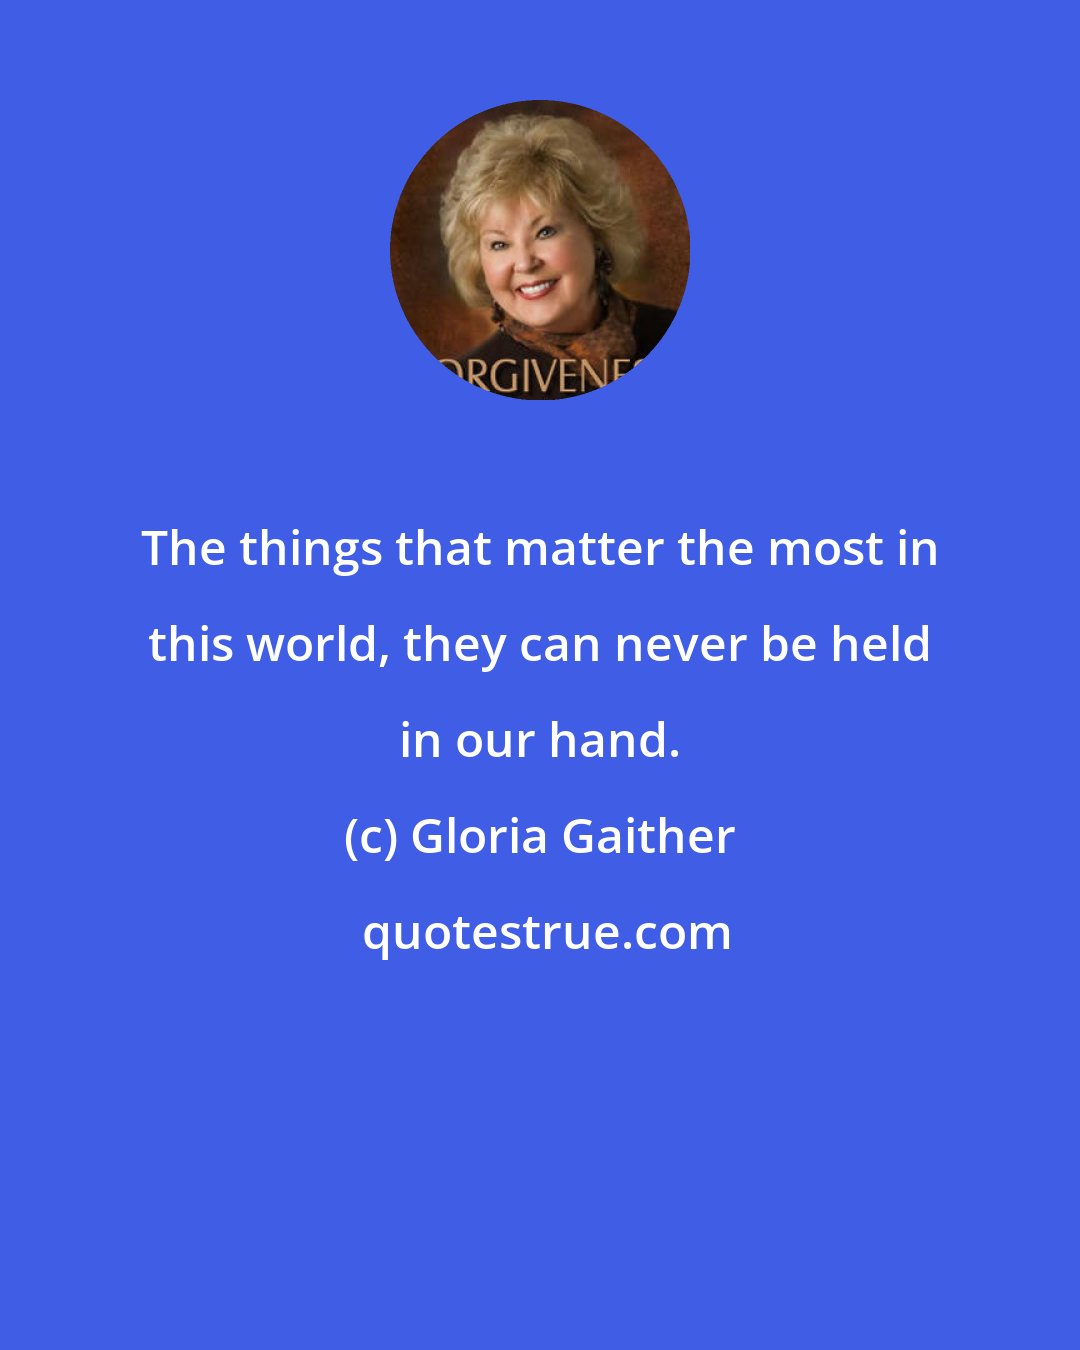 Gloria Gaither: The things that matter the most in this world, they can never be held in our hand.